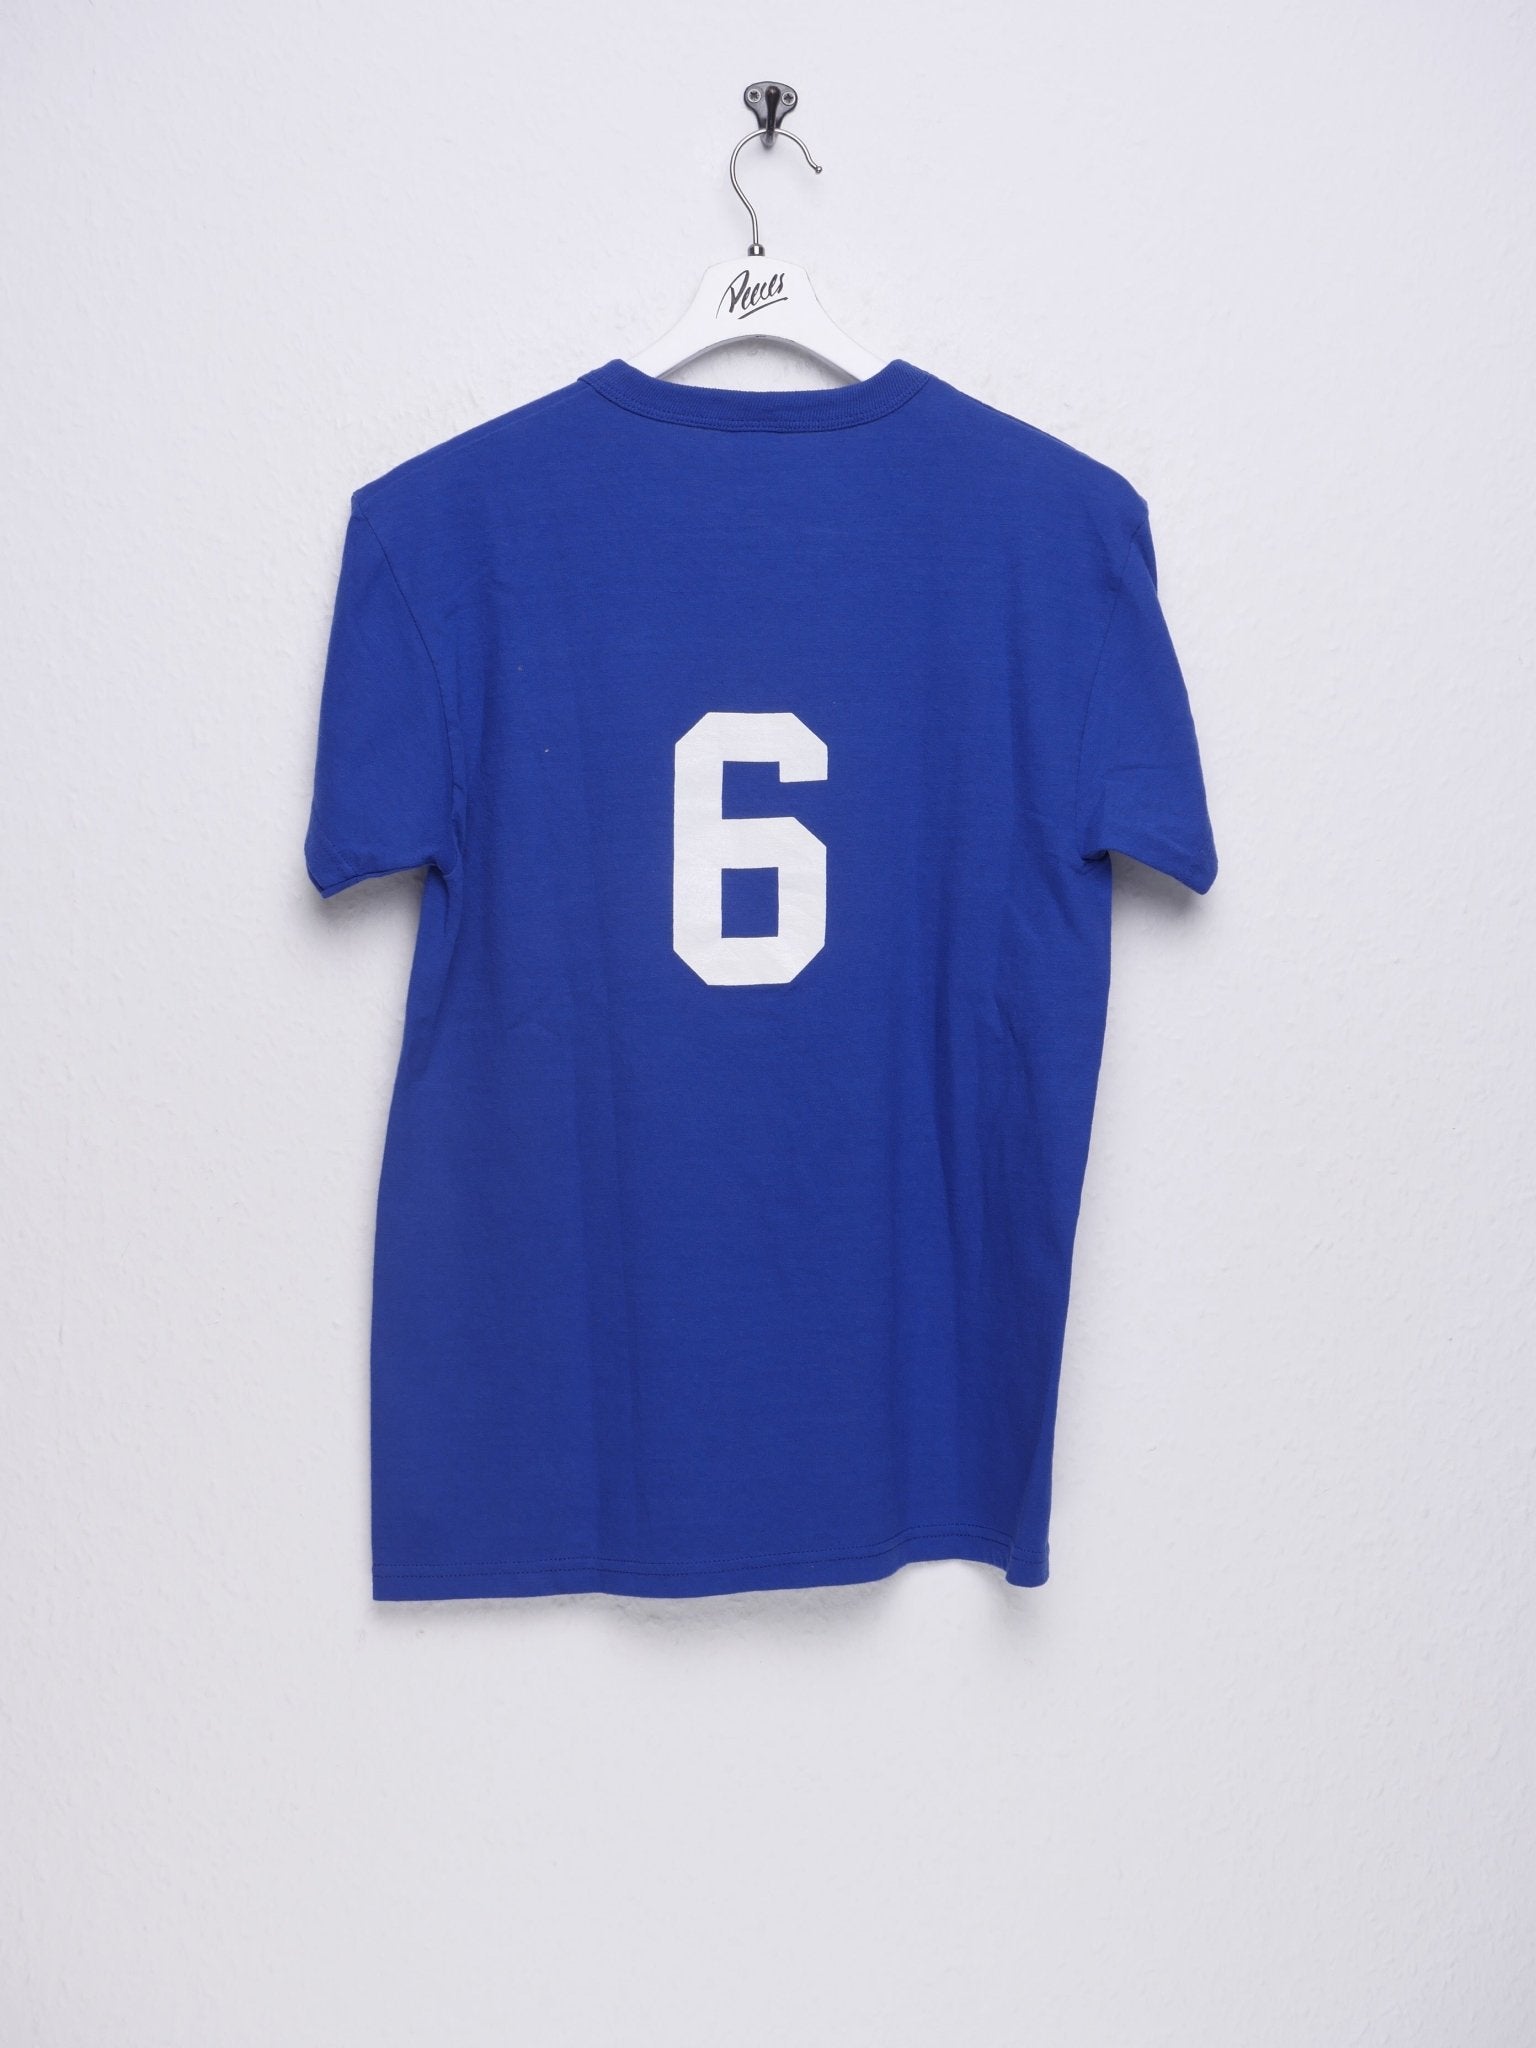 Russell Athletic printed Spellout blue Shirt - Peeces